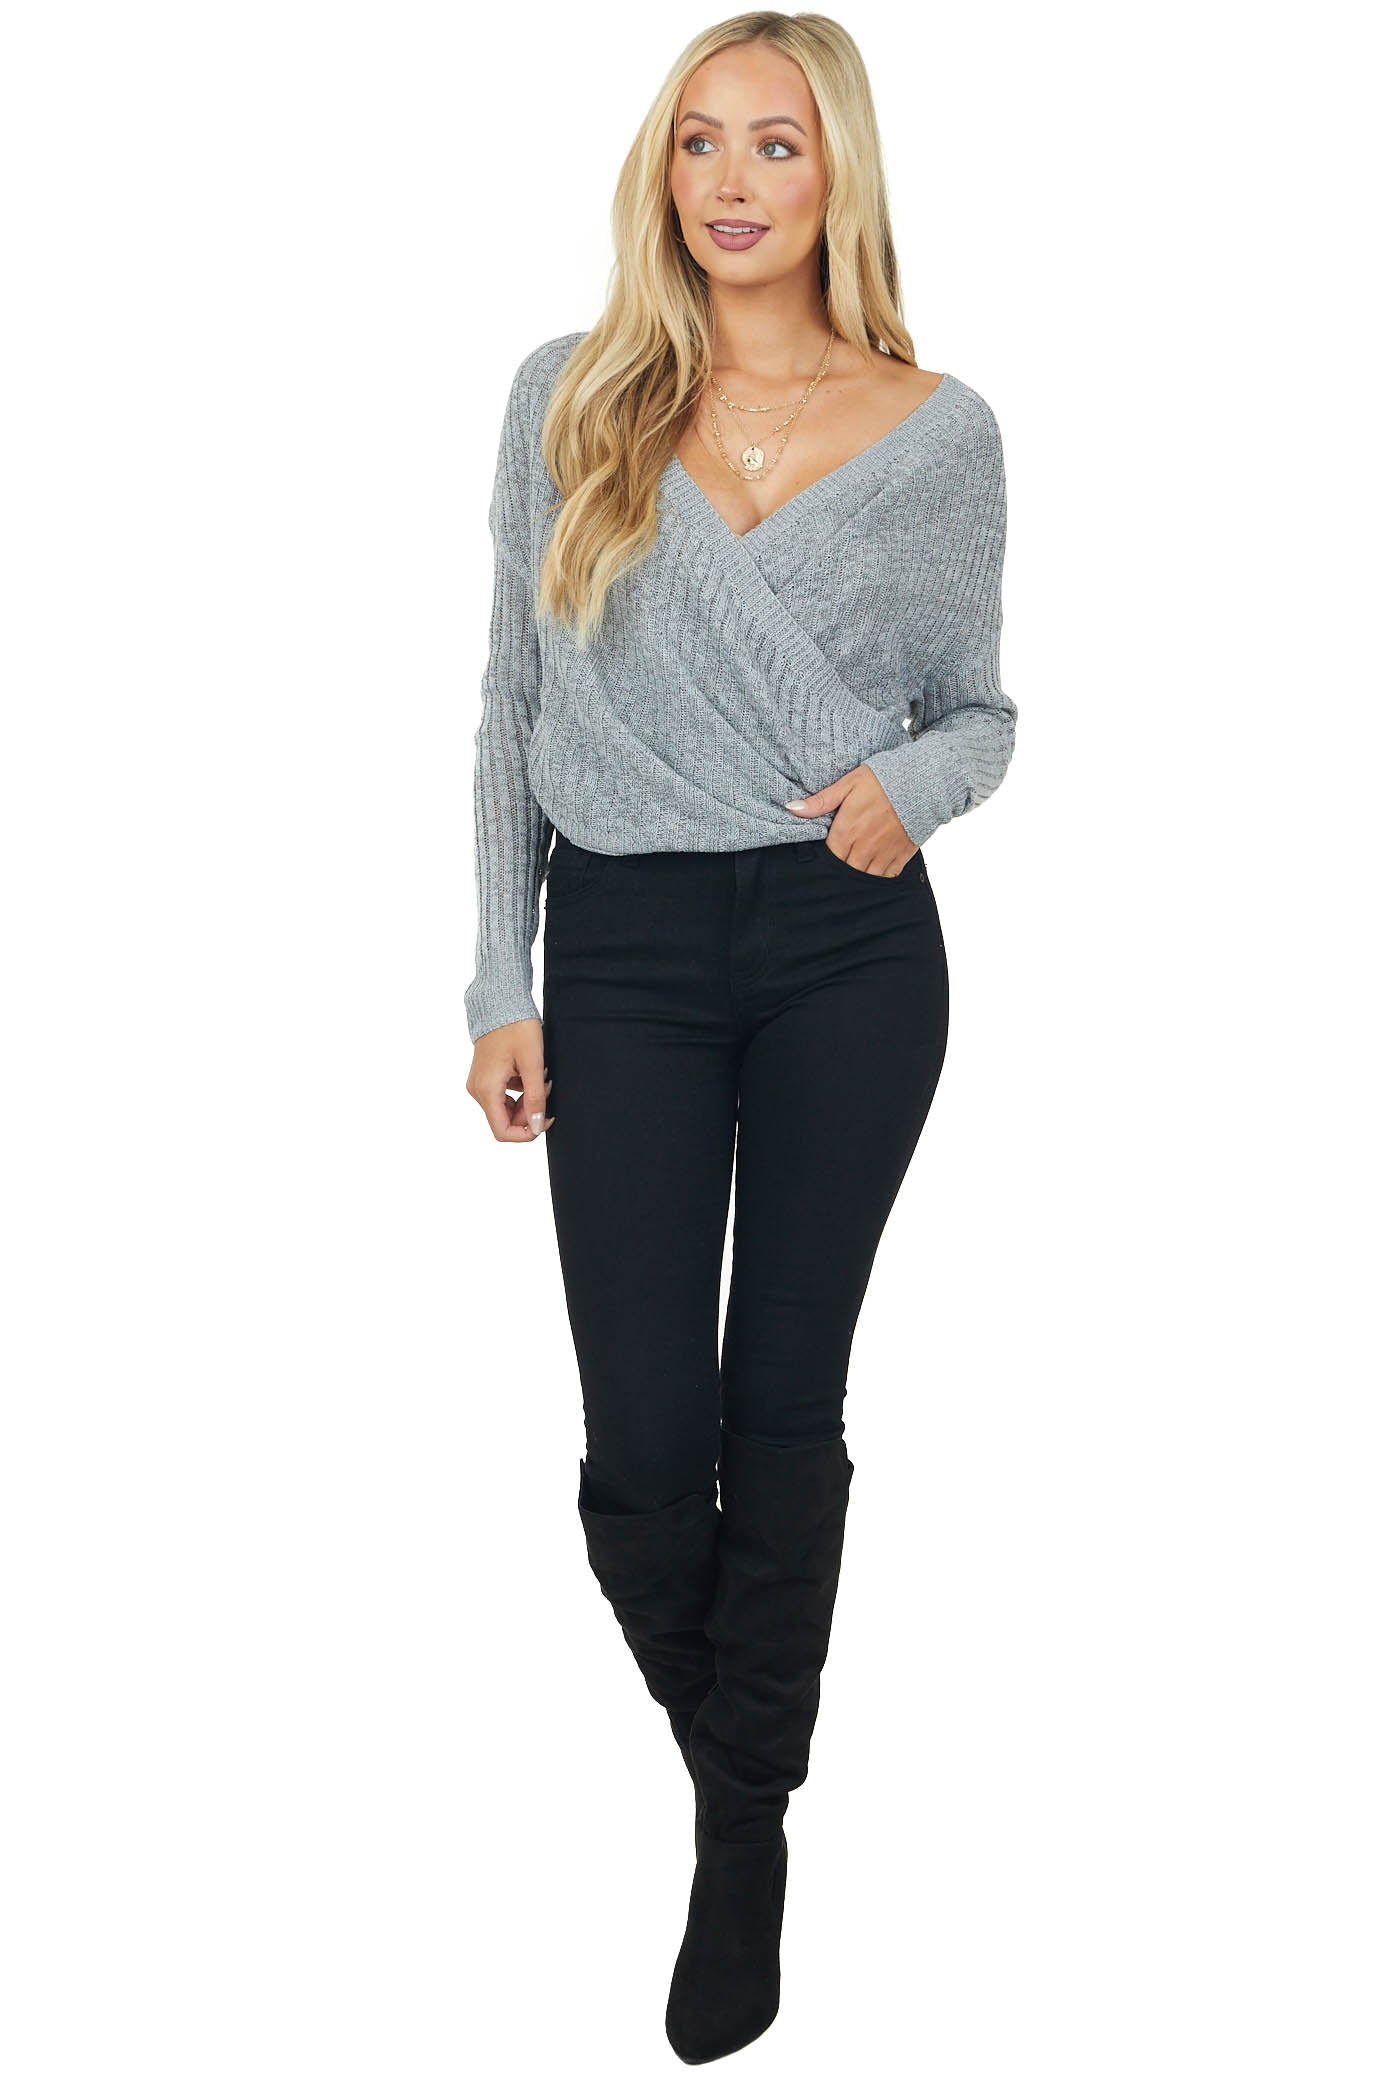 Dove Grey Long Sleeve Sweater Wrap Knit Top